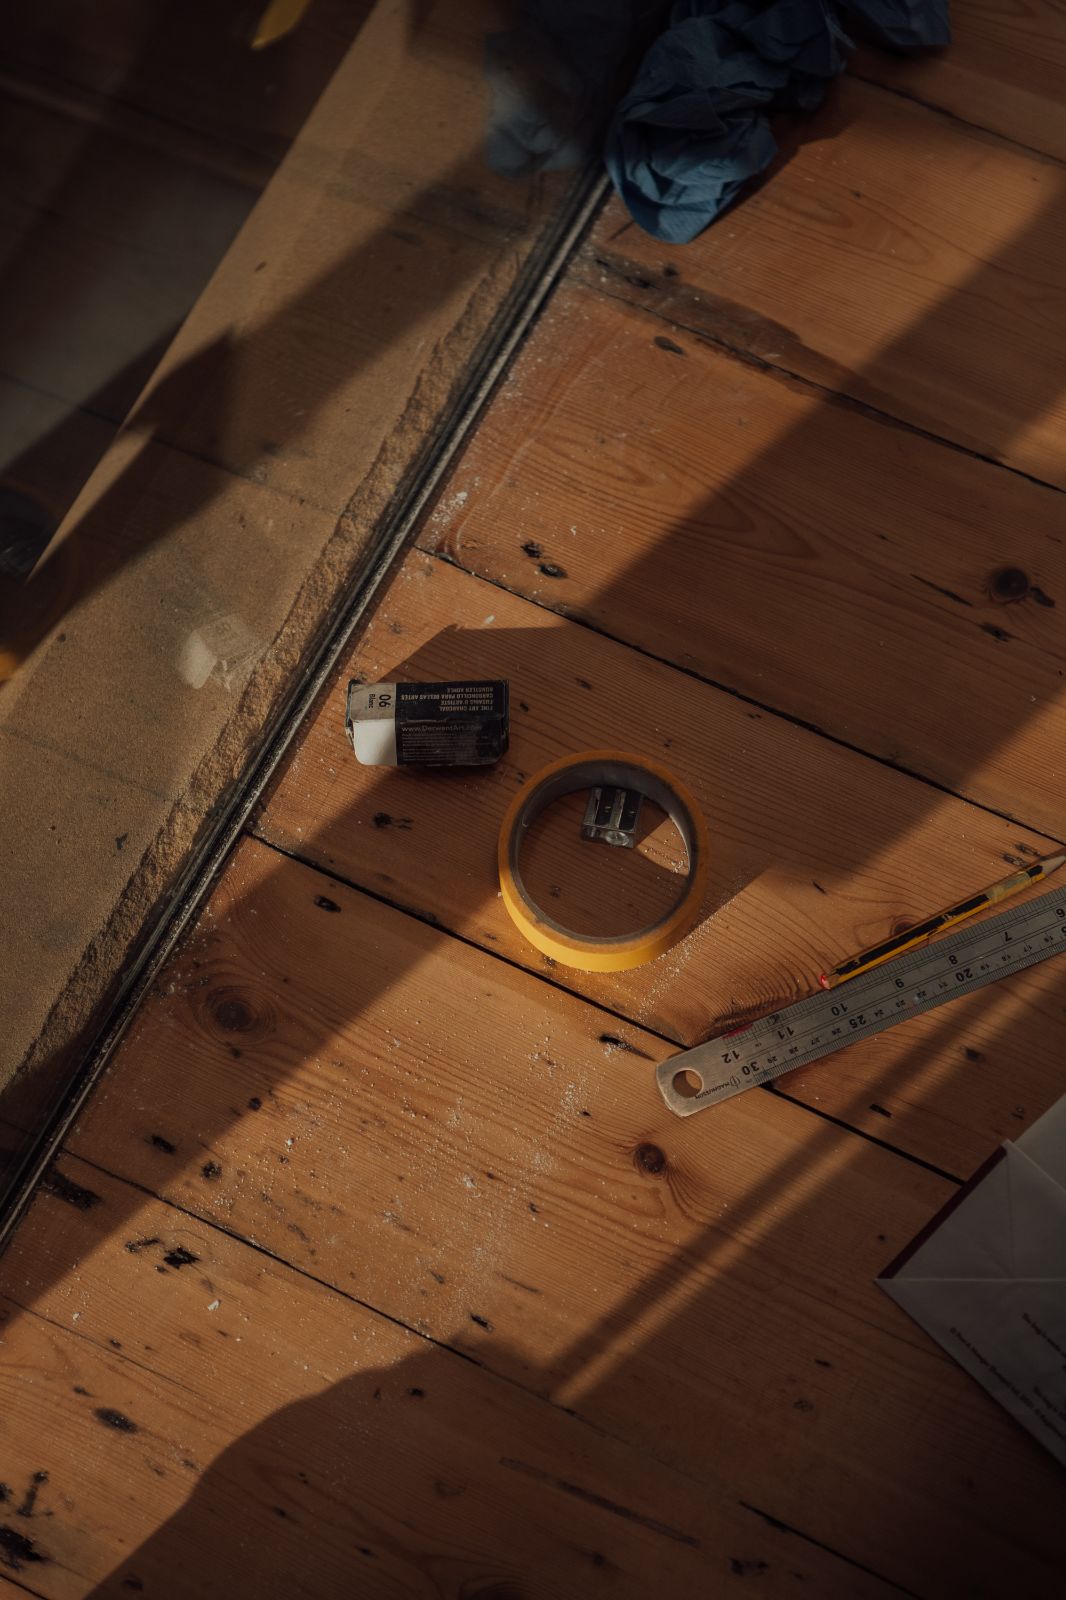 Tape, pencil sharpener, pencil and ruler on wooden floorboards with strong shadow cast by unseen object.